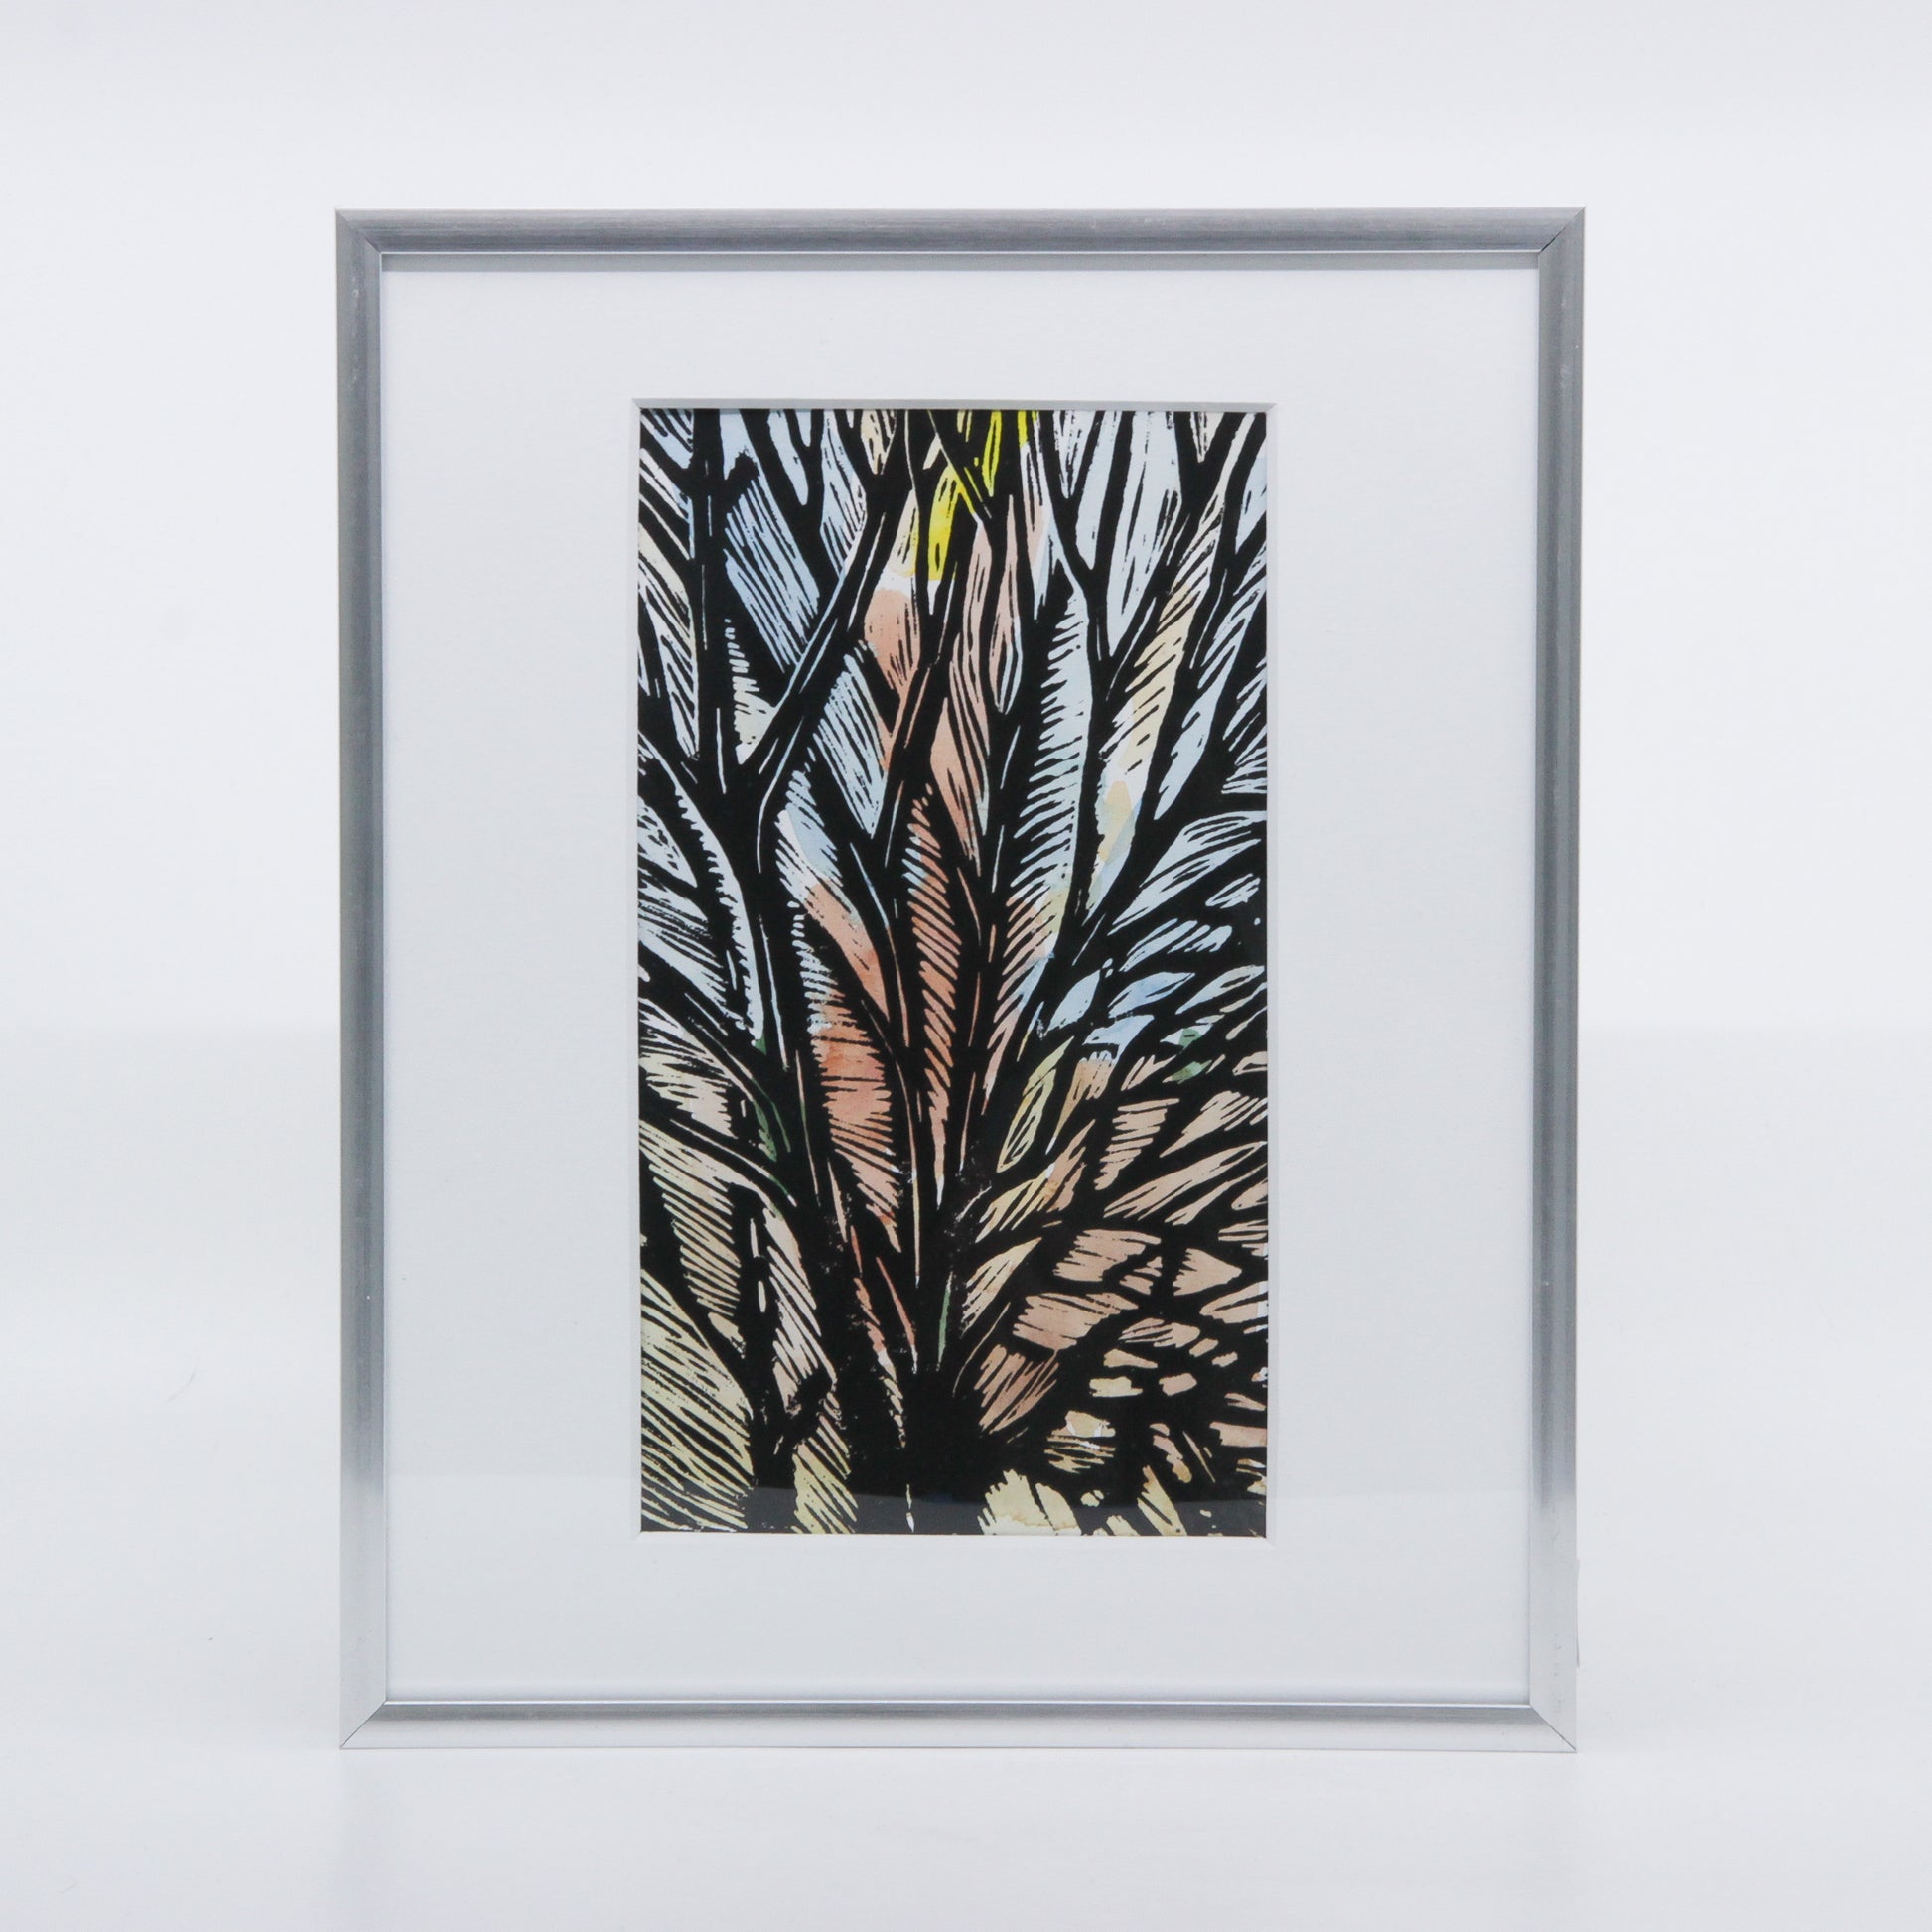 Watercolour and linocut print of a winter tree